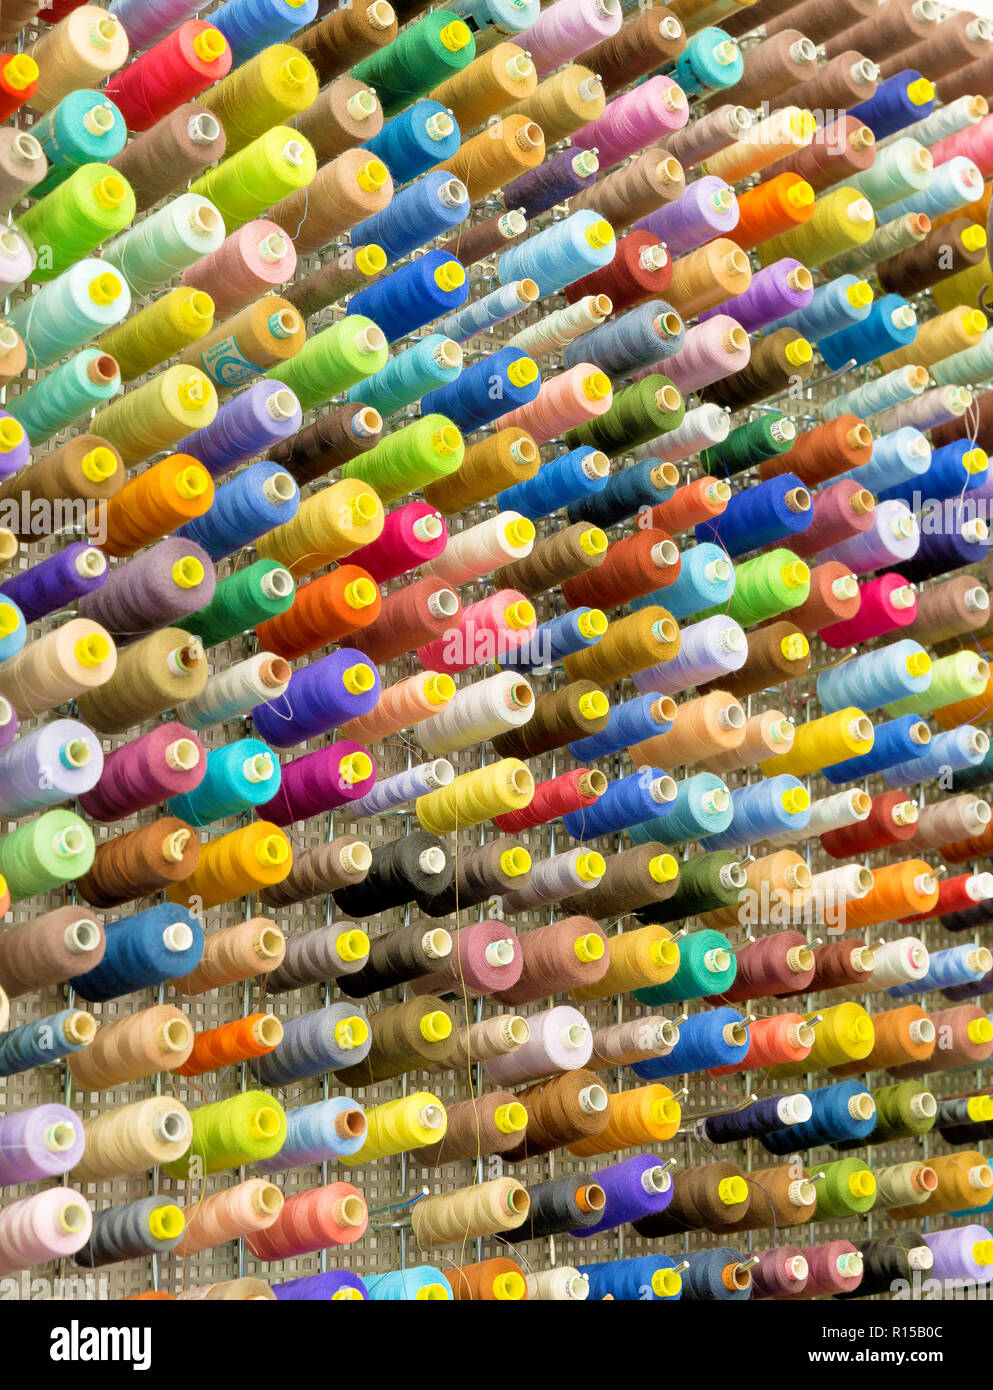 Organized wall of spools with sewing threads in many color variations Stock Photo